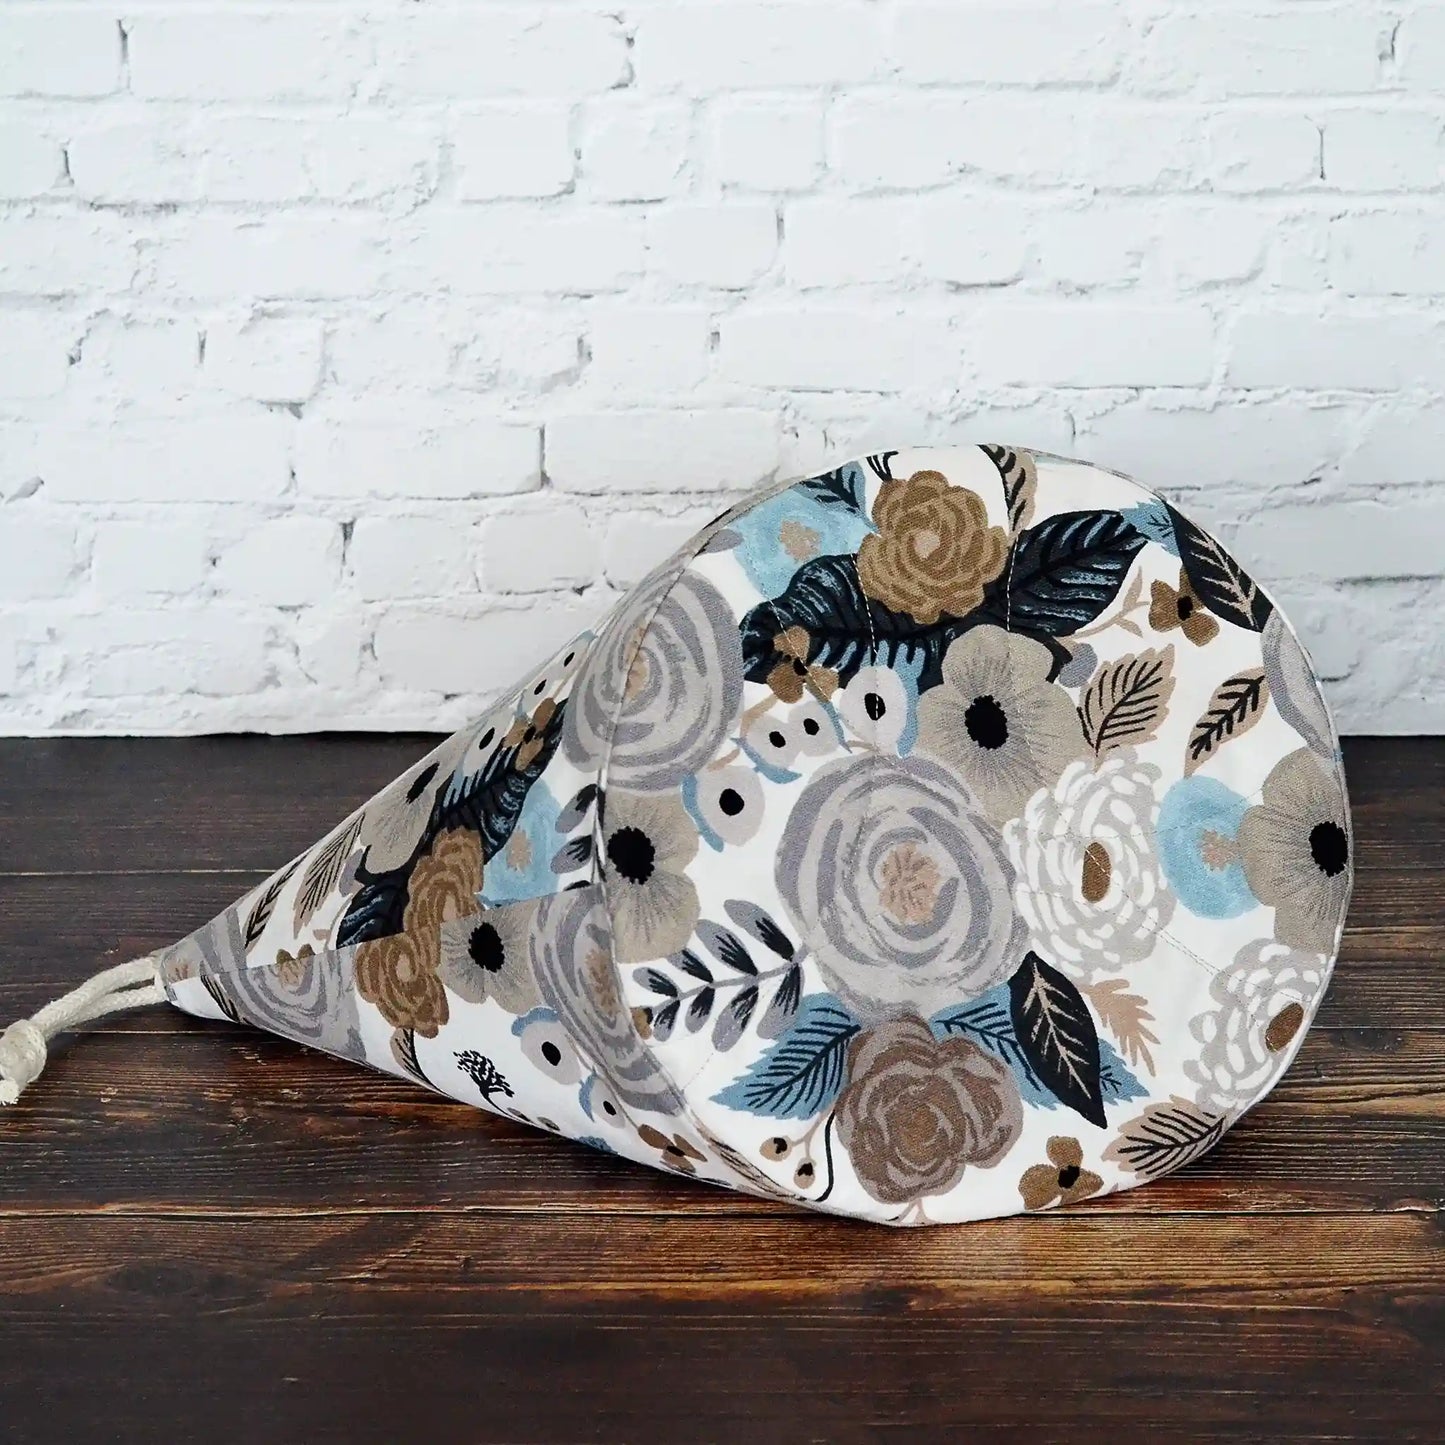 Pretty grey floral bucket bag for knitting or crochet in canvas by Rifle Paper Co.  Made in Nova Scotia by Yellow Petal Handmade.